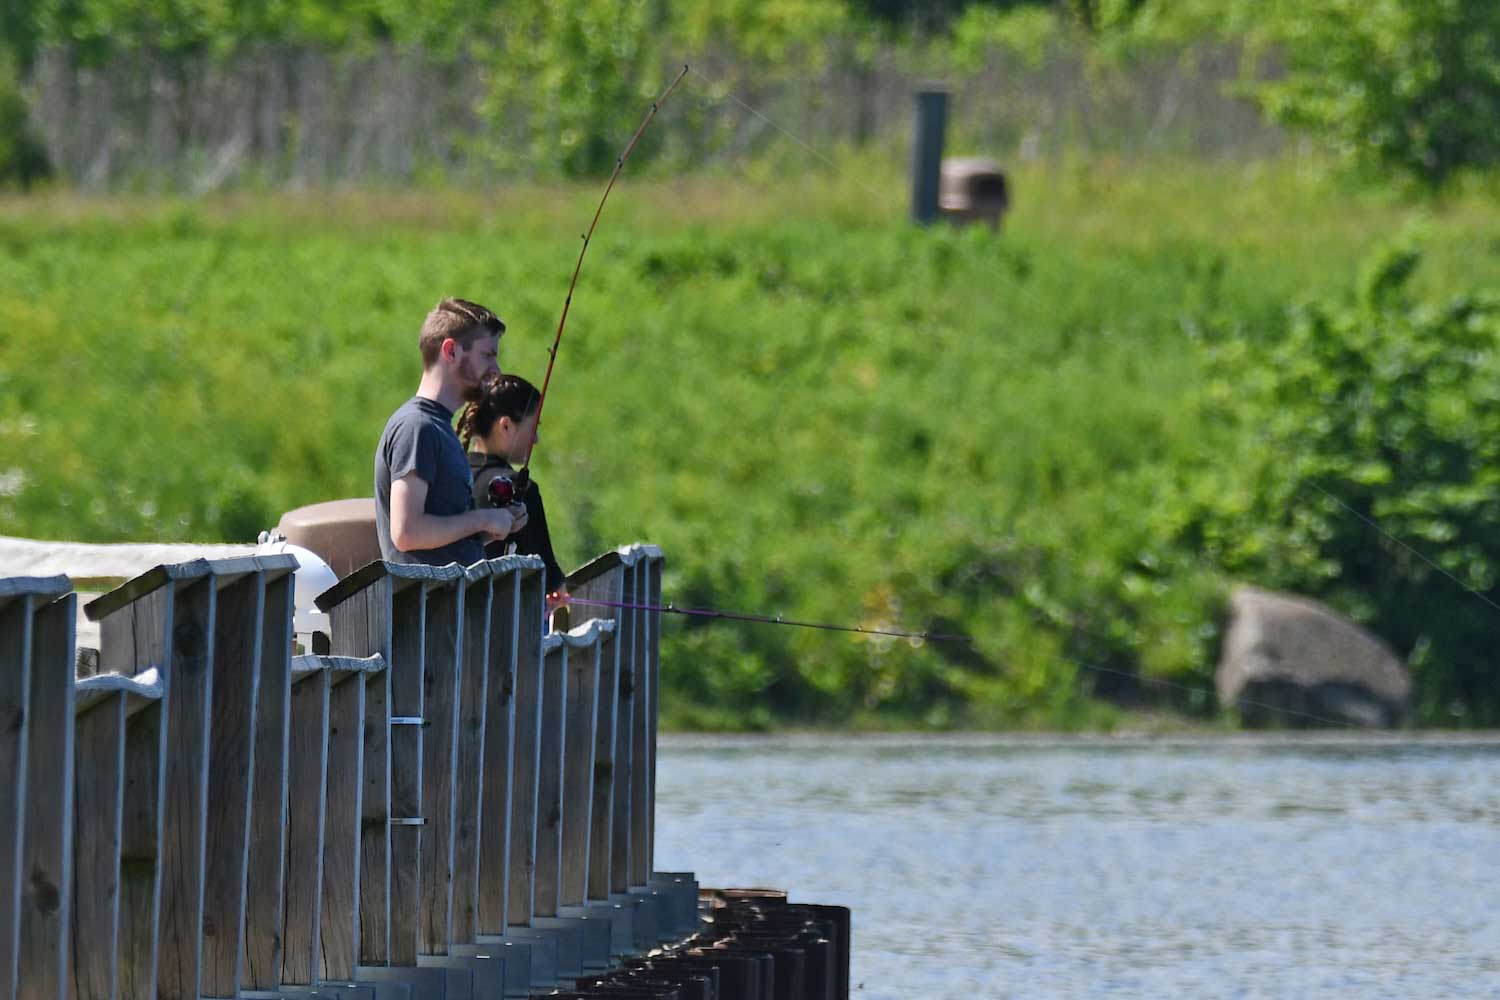 Two people fishing from behind a wooden railing along a shoreline.